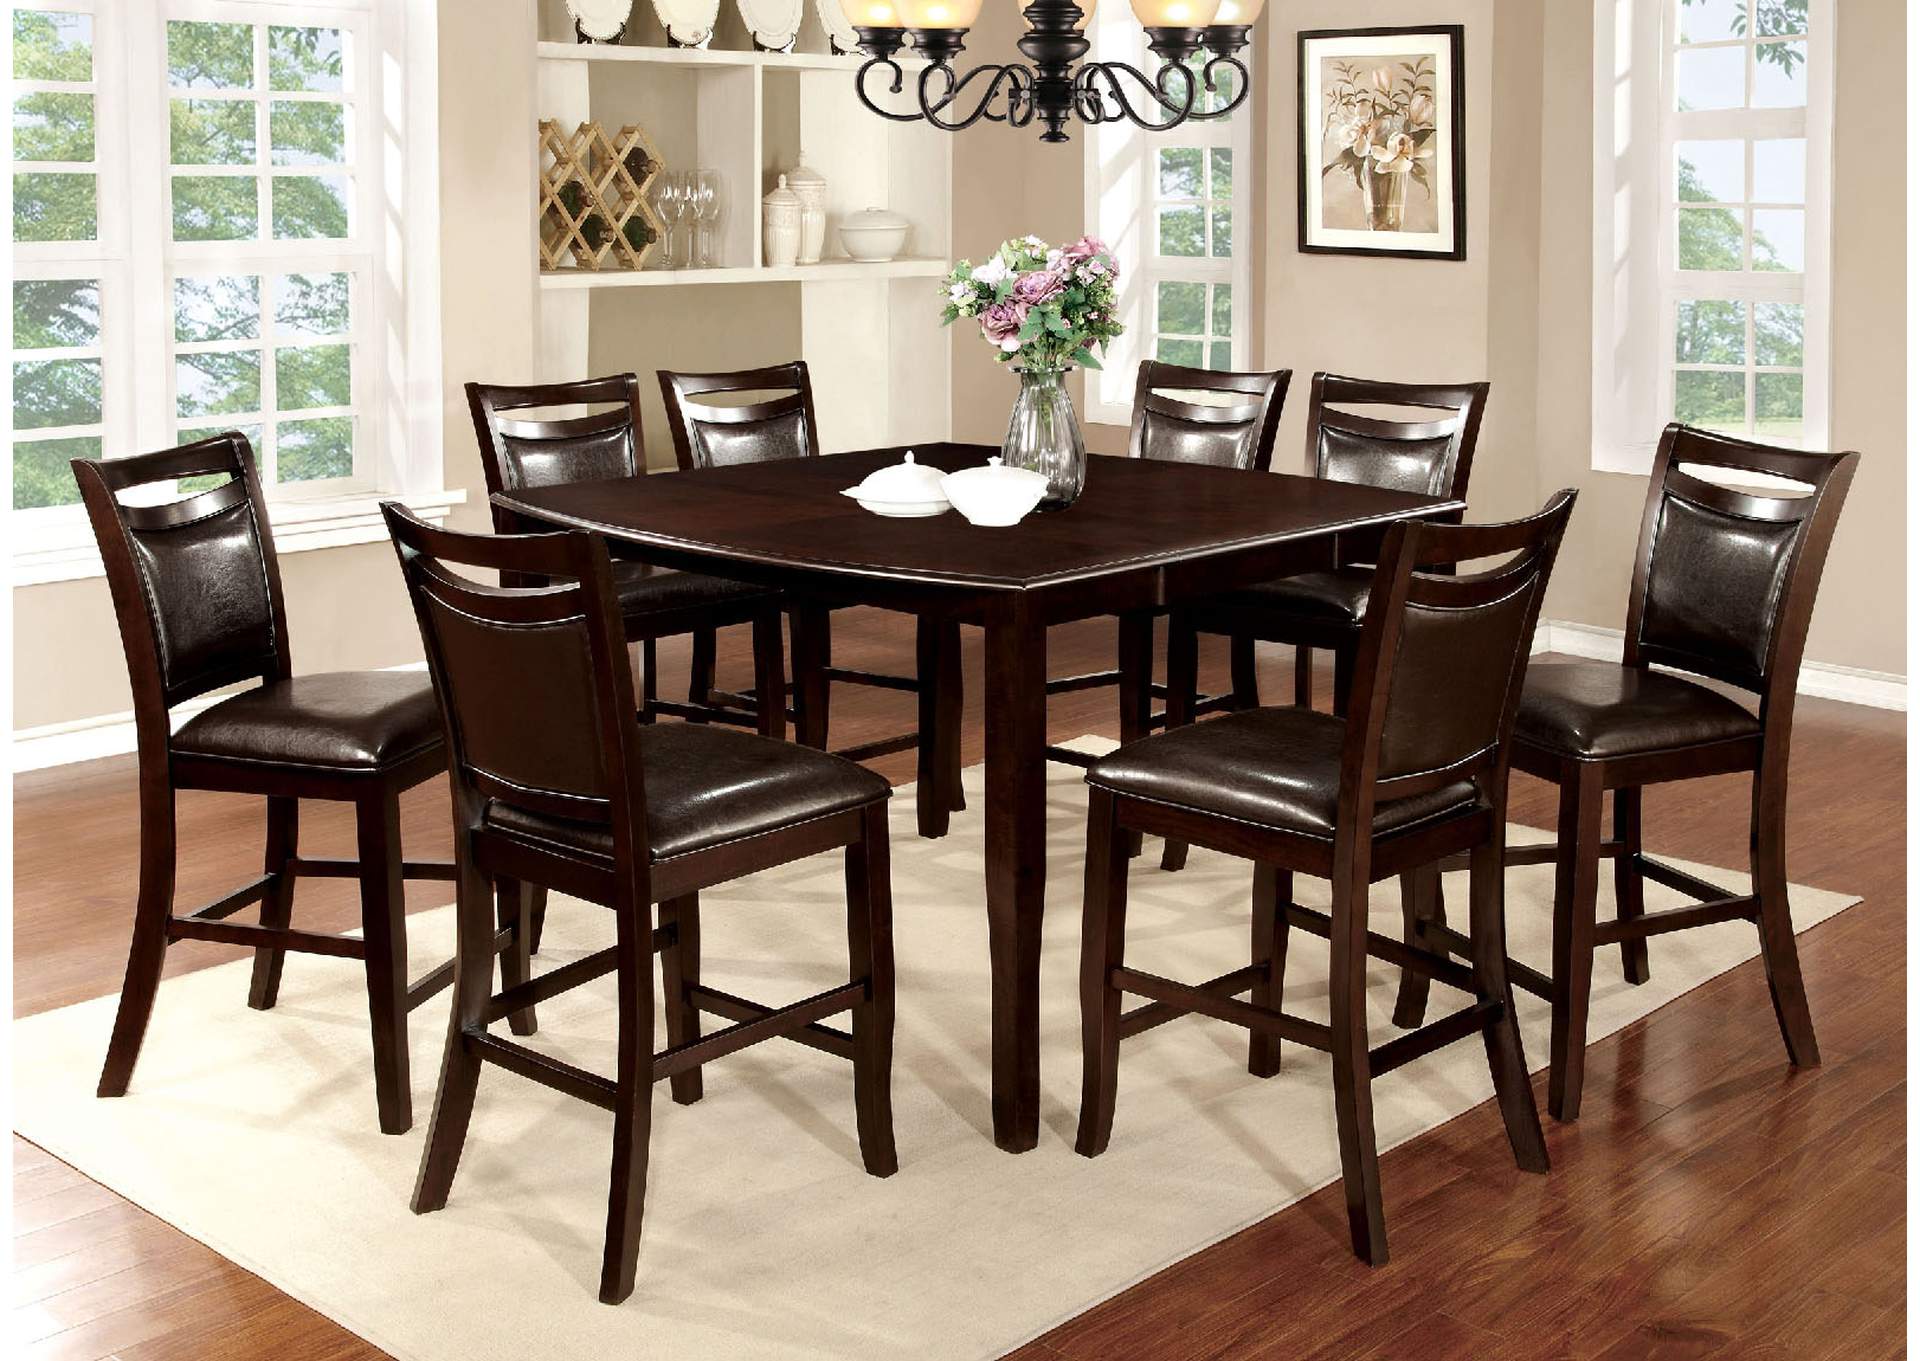 Woodside II Espresso Counter Height Table w/8 Counter Height Chairs,Furniture of America TX